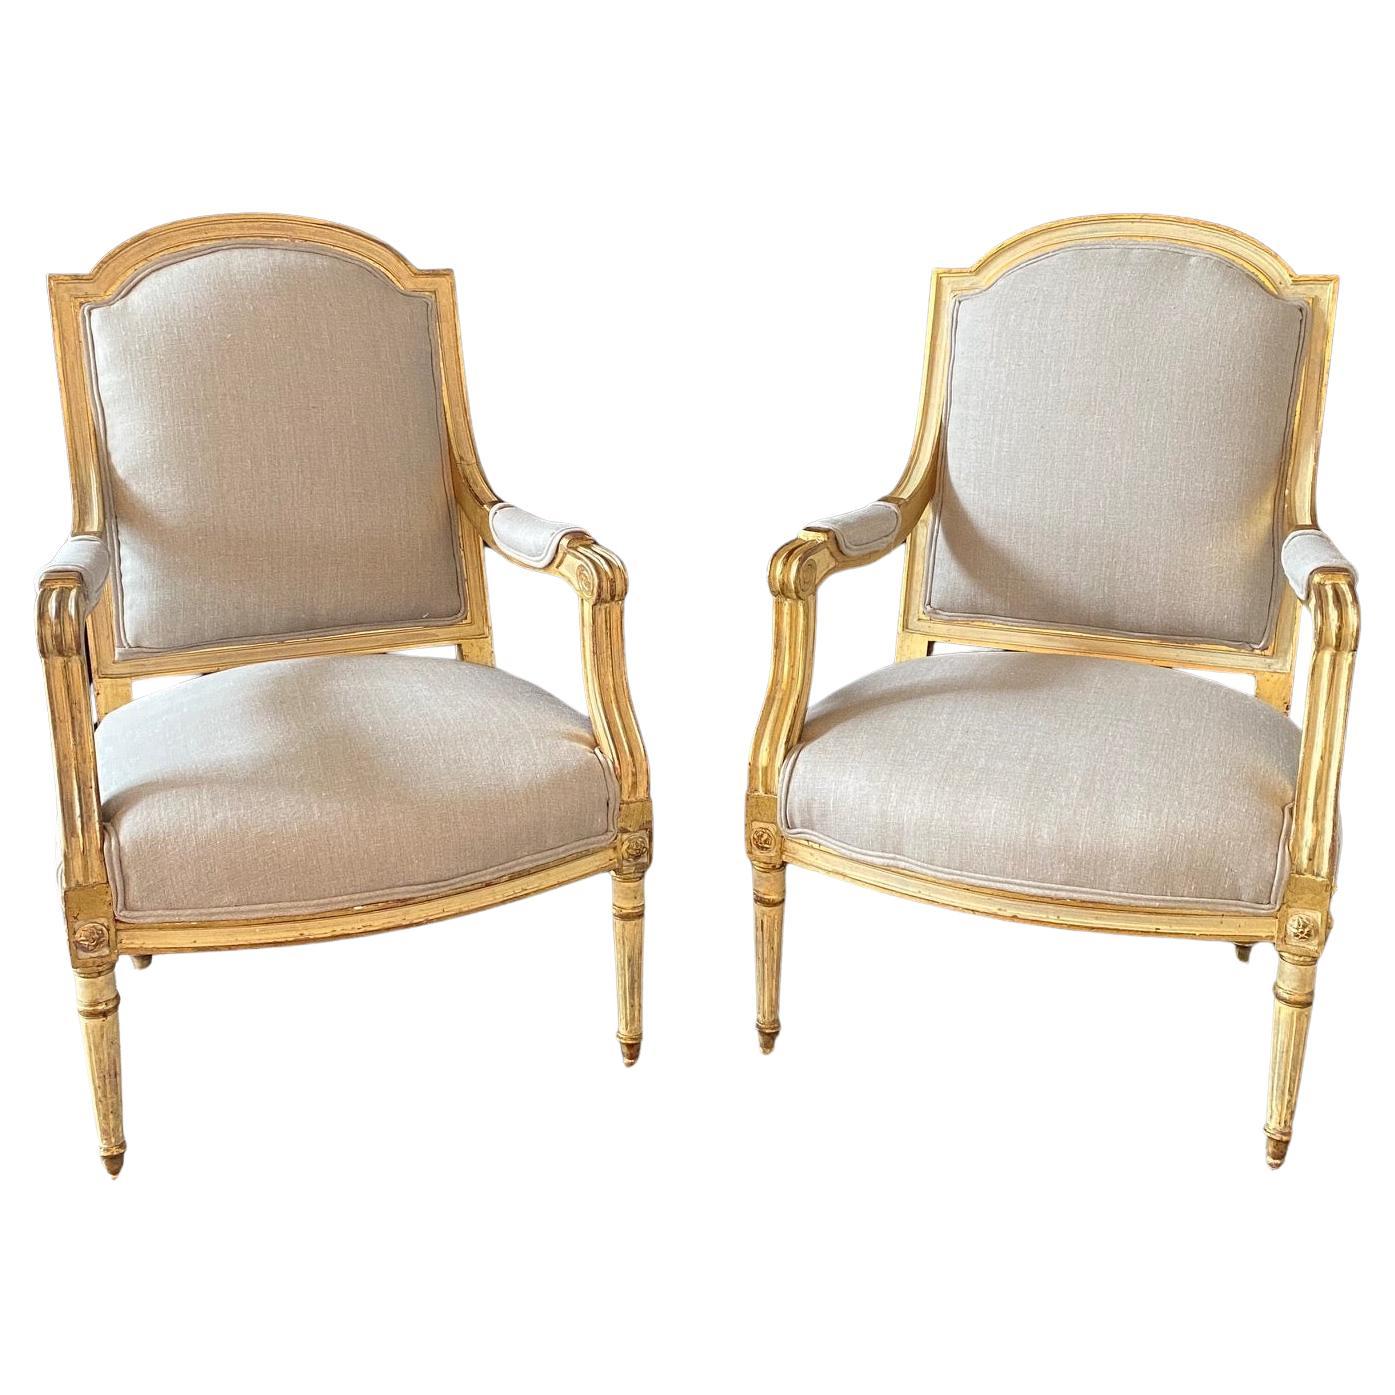 Pair of French Louis XVI Neoclassical Gold Gilt Painted Armchairs For Sale